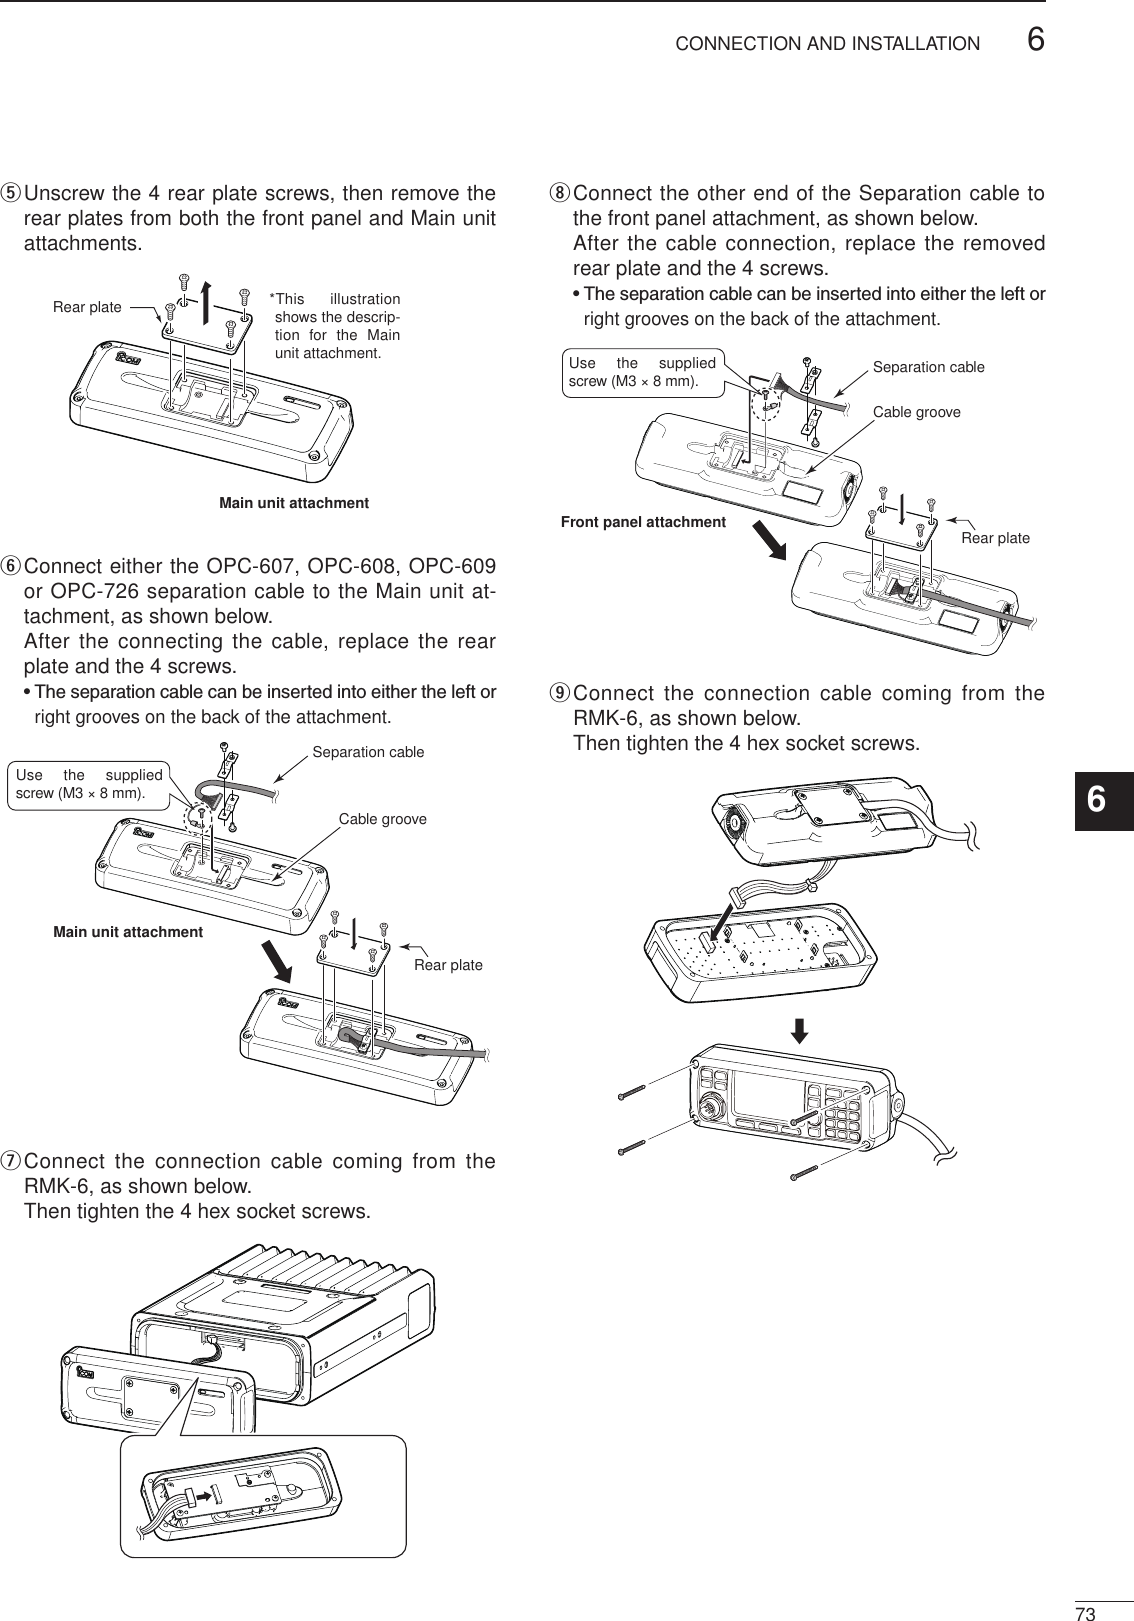 2001 NEW736CONNECTION AND INSTALLATION1234567891011121314151617Quick Referencet  Unscrew the 4 rear plate screws, then remove the rear plates from both the front panel and Main unit attachments.Rear plate *This illustration shows the descrip-tion for  the Main unit attachment.Main unit attachmenty  Connect either the OPC-607, OPC-608, OPC-609 or OPC-726 separation cable to the Main unit at-tachment, as shown below.   After the connecting the cable, replace the rear plate and the 4 screws.  •  The separation cable can be inserted into either the left or right grooves on the back of the attachment.Use the supplied screw (M3 × 8 mm).Rear plateMain unit attachmentCable grooveSeparation cableu  Connect the  connection  cable coming  from the RMK-6, as shown below.    Then tighten the 4 hex socket screws.i  Connect the other end of the Separation cable to the front panel attachment, as shown below.   After the cable connection, replace the removed rear plate and the 4 screws.  •  The separation cable can be inserted into either the left or right grooves on the back of the attachment.Rear plateFront panel attachmentCable grooveSeparation cableUse the supplied screw (M3 × 8 mm).o  Connect the  connection  cable coming  from the RMK-6, as shown below.    Then tighten the 4 hex socket screws.